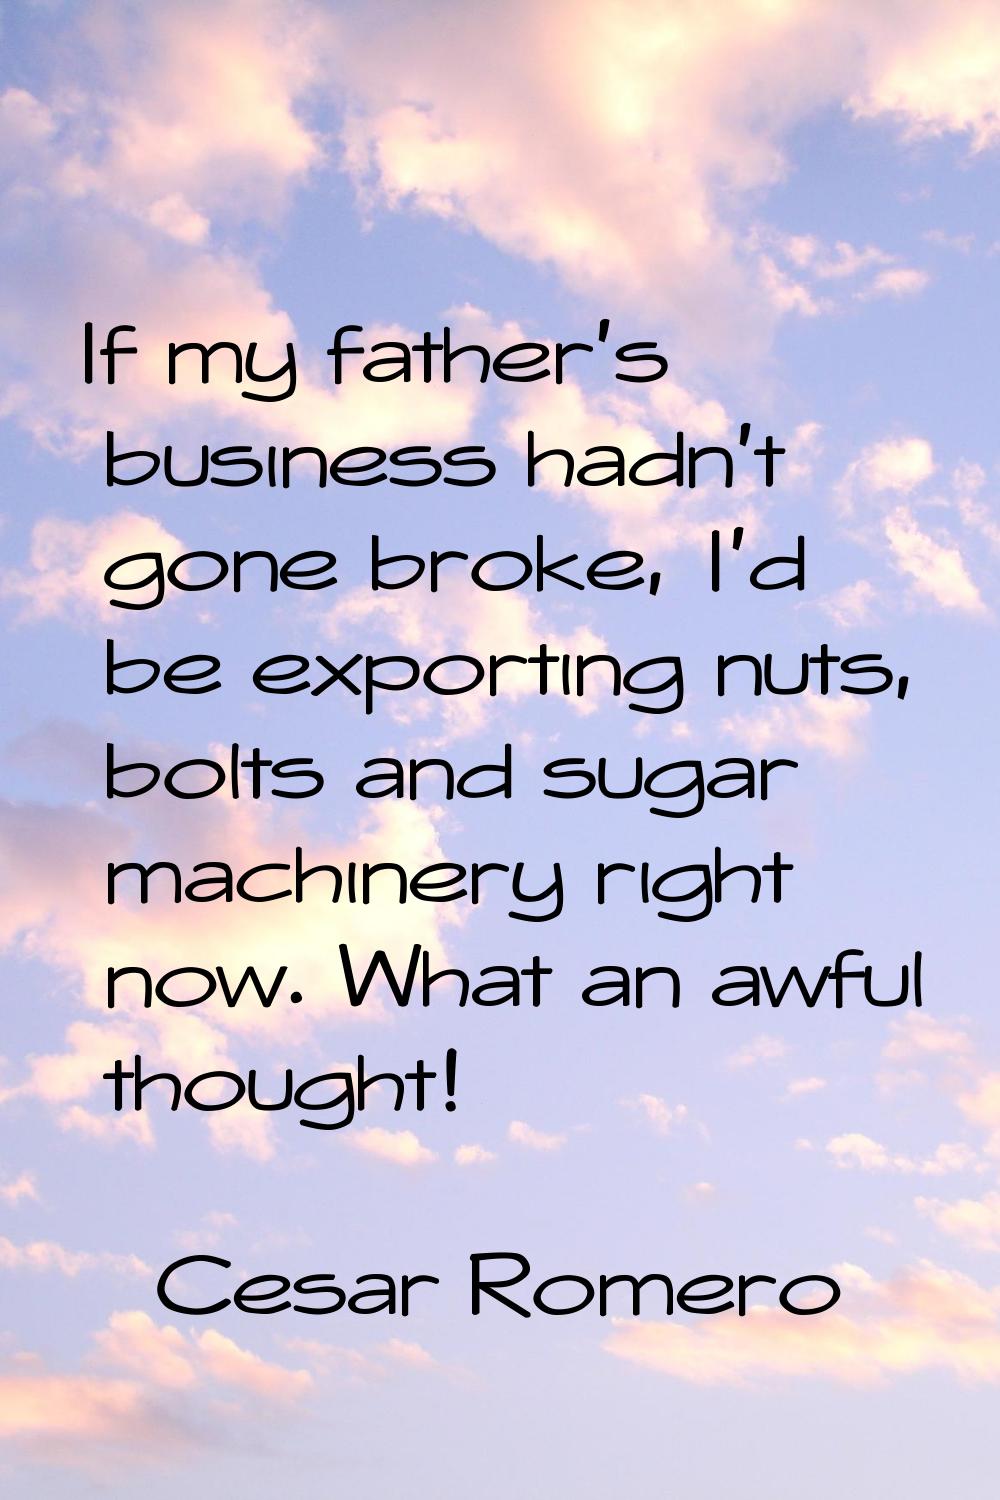 If my father's business hadn't gone broke, I'd be exporting nuts, bolts and sugar machinery right n